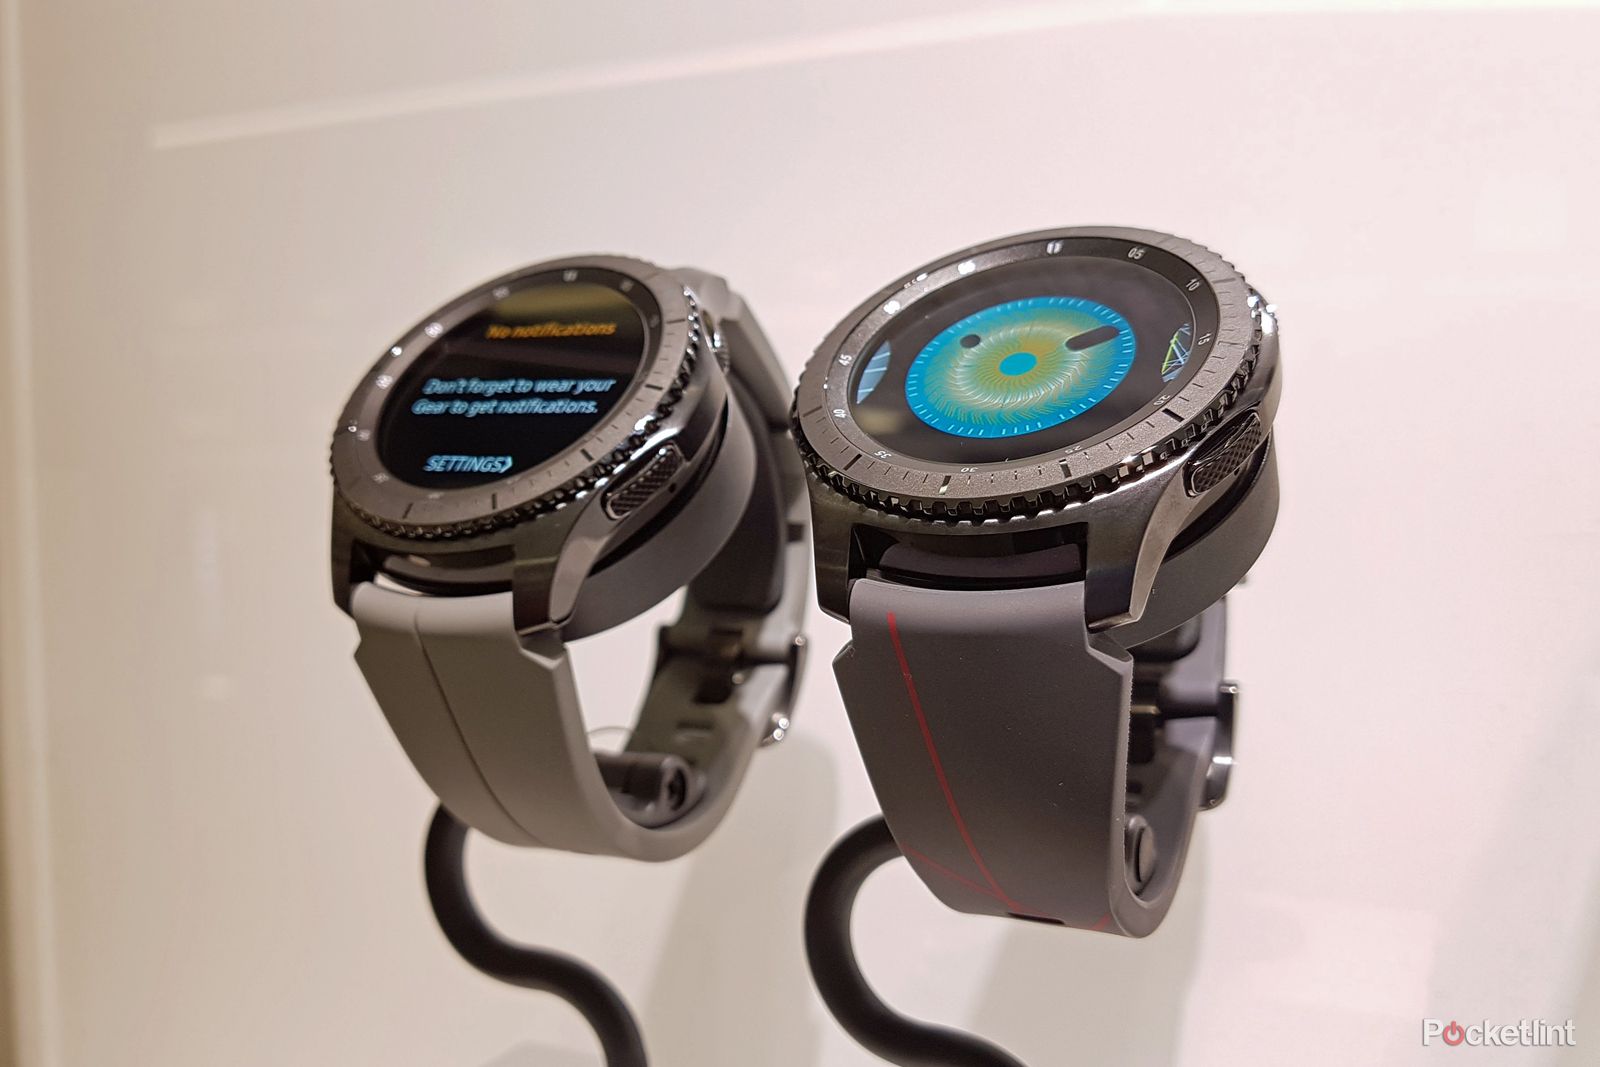 connected watches of baselworld 2017 from hybrid to smart in all shapes and sizes image 11